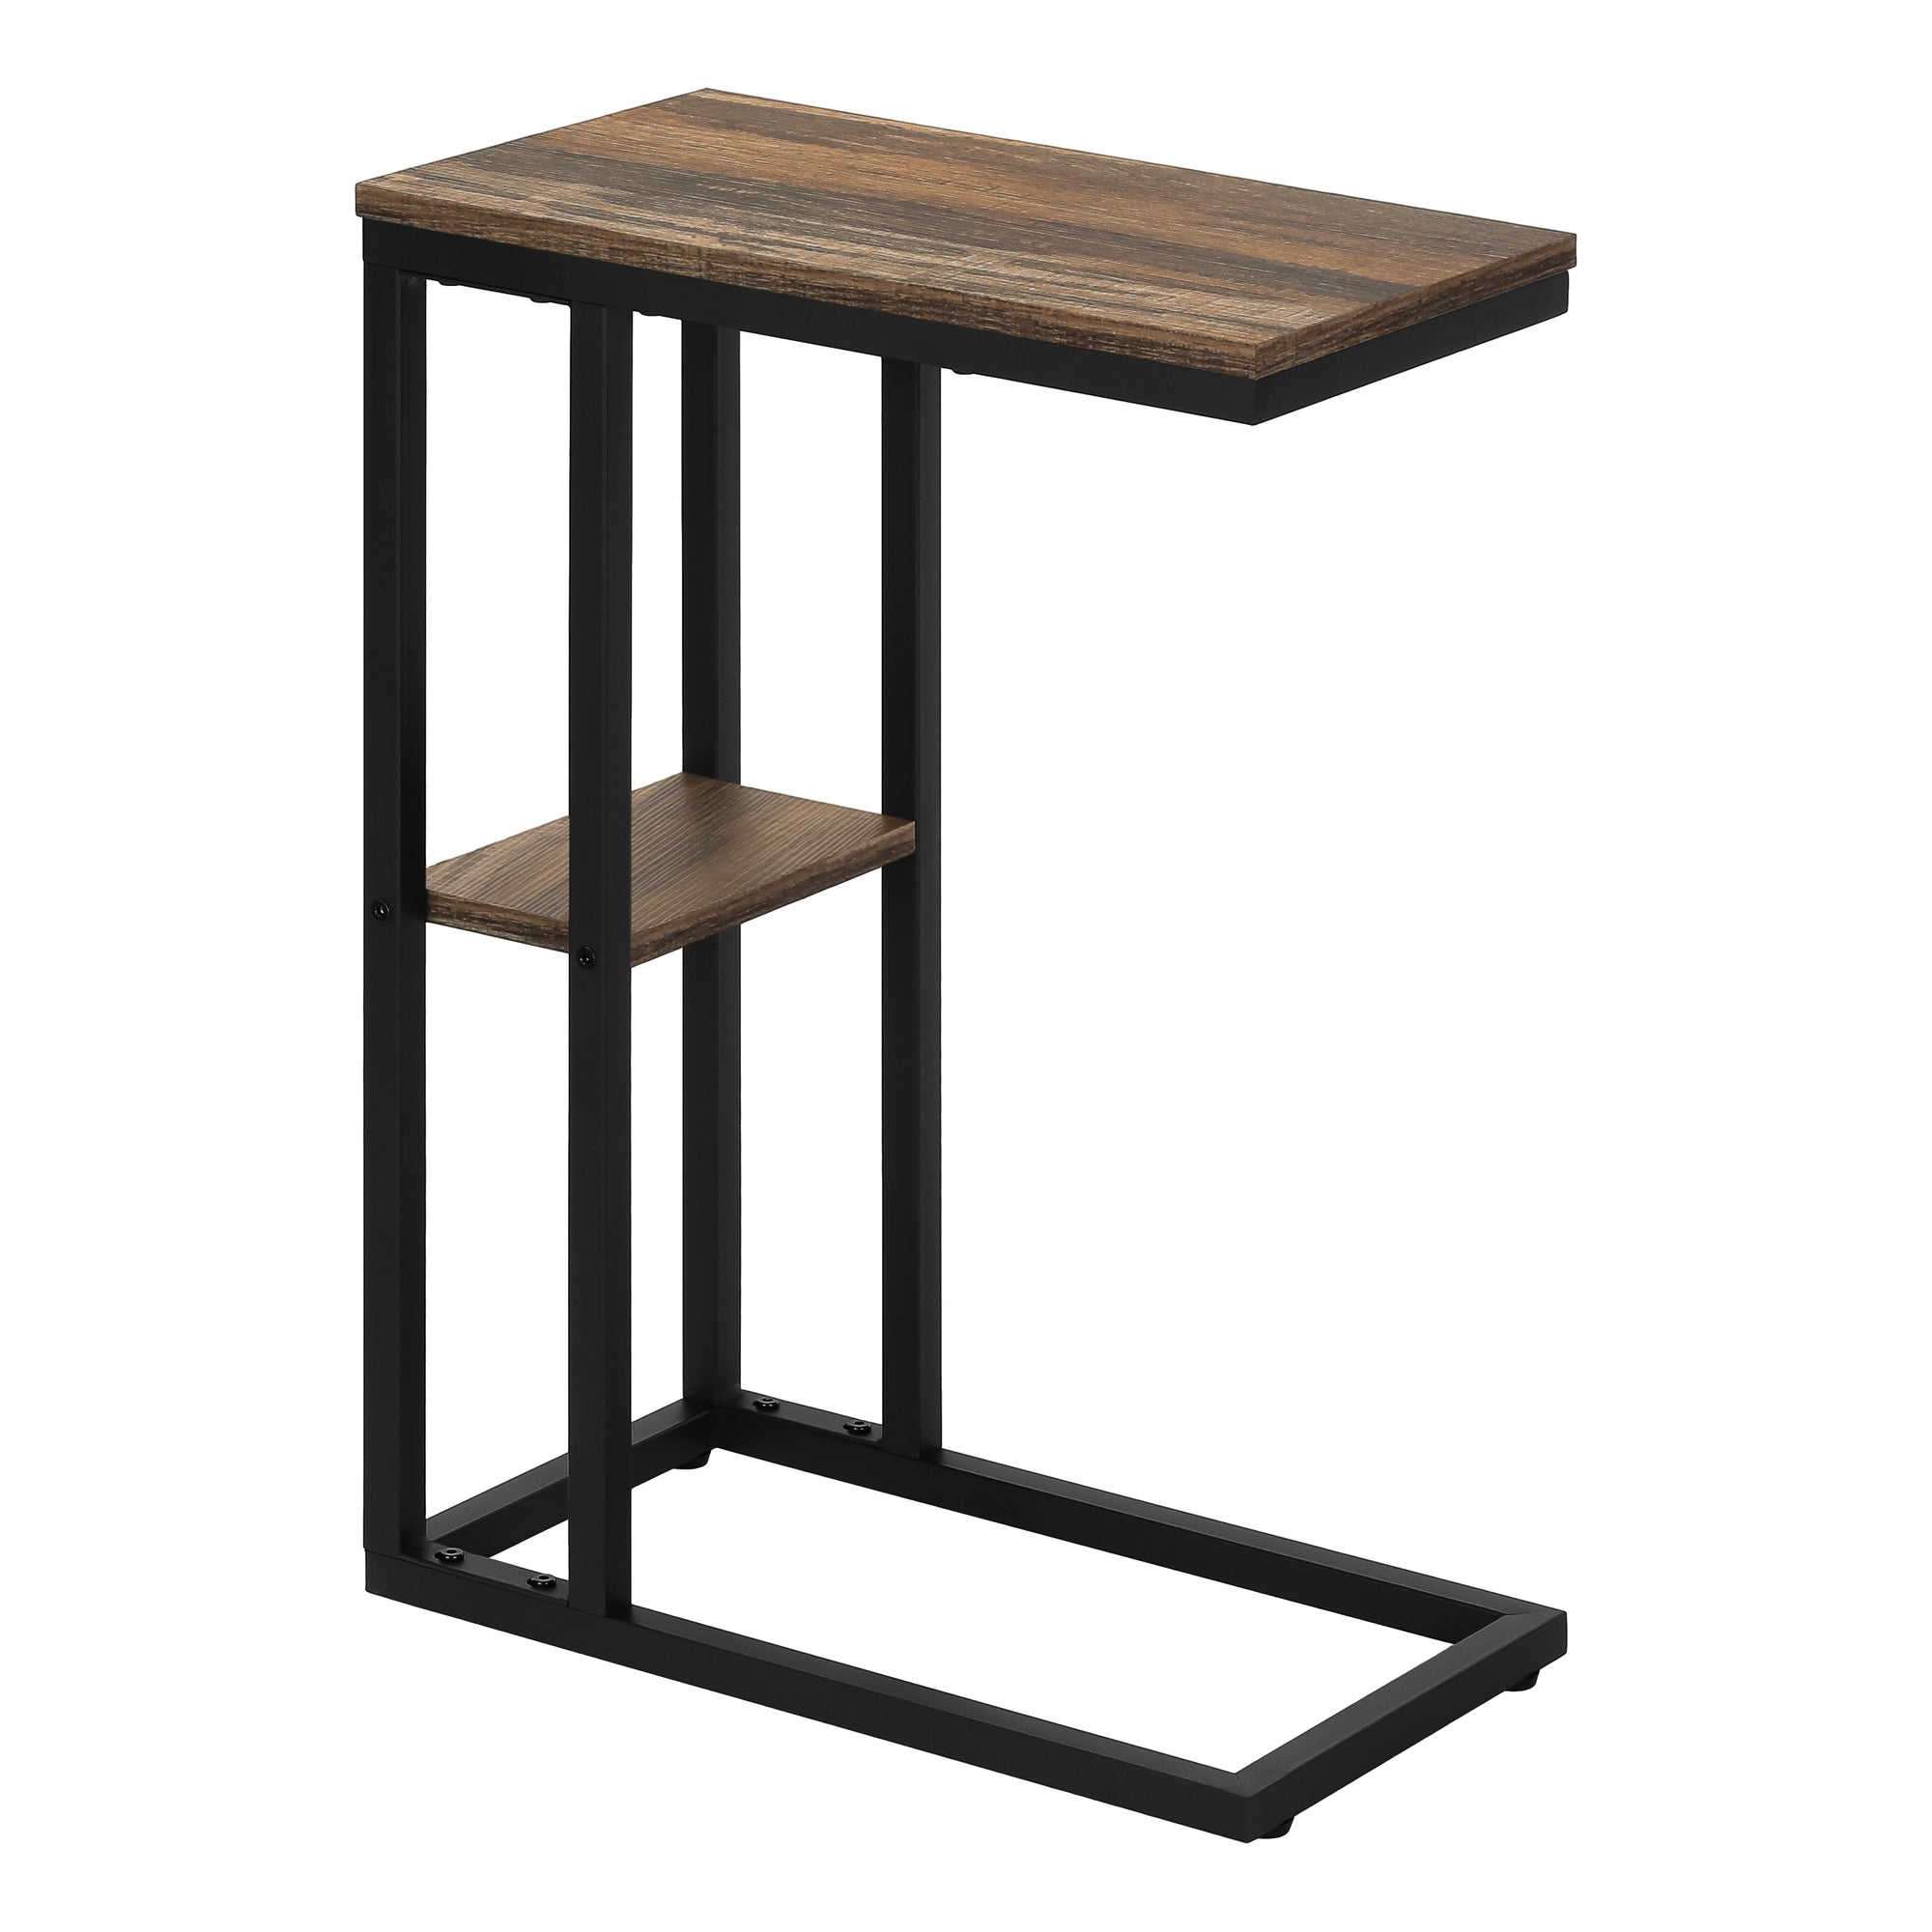 MN-193673    Accent Table, C-Shaped, End, Side, Snack, Living Room, Bedroom, Metal Legs, Laminate, Brown Reclaimed Wood Look, Black, Contemporary, Modern